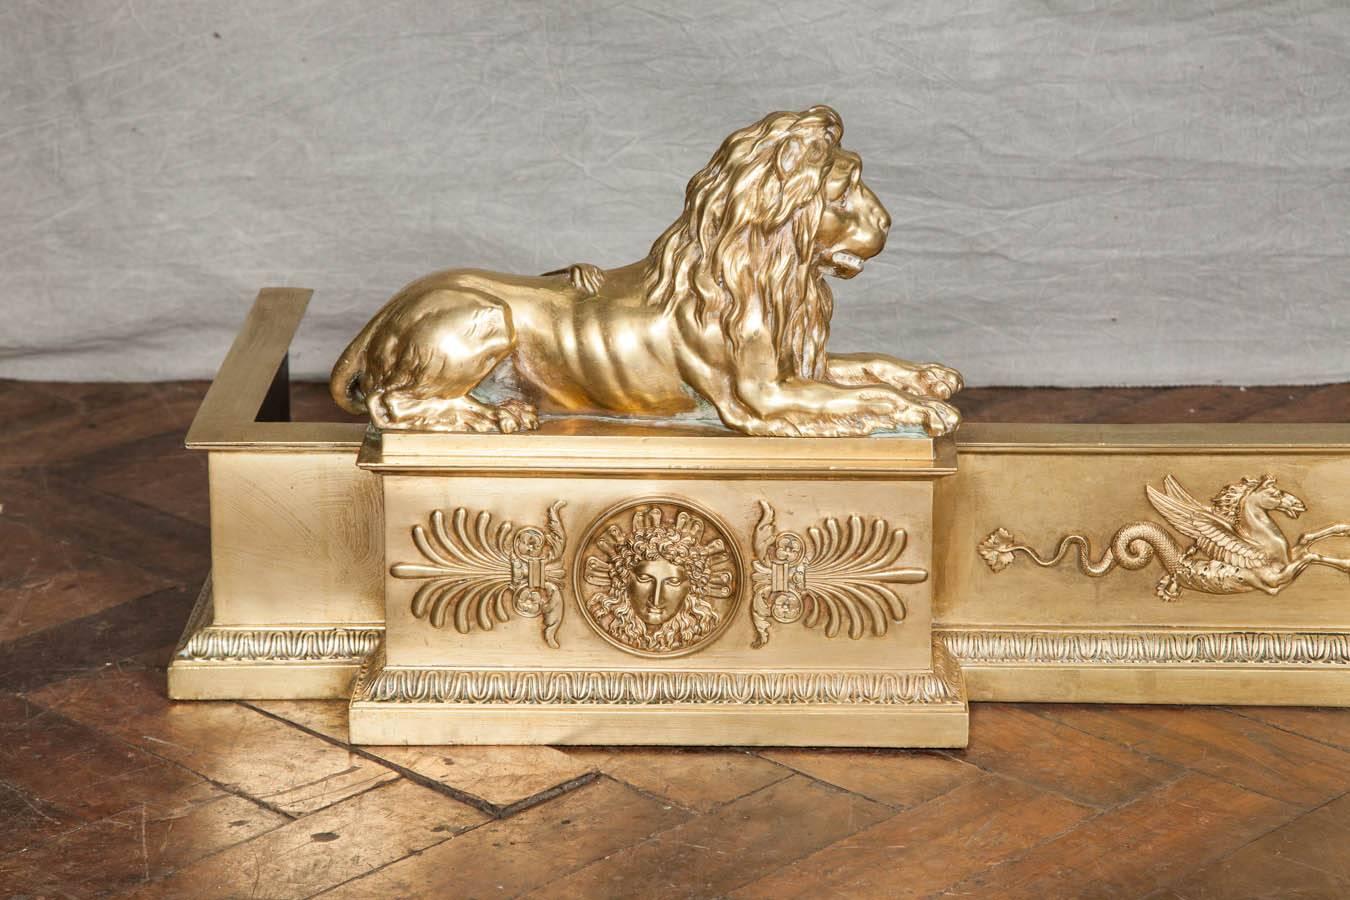 A very impressive large Empire influenced brass fire fender, having a pair of recumbent Lions mounted to either side and classical motifs to the frieze.